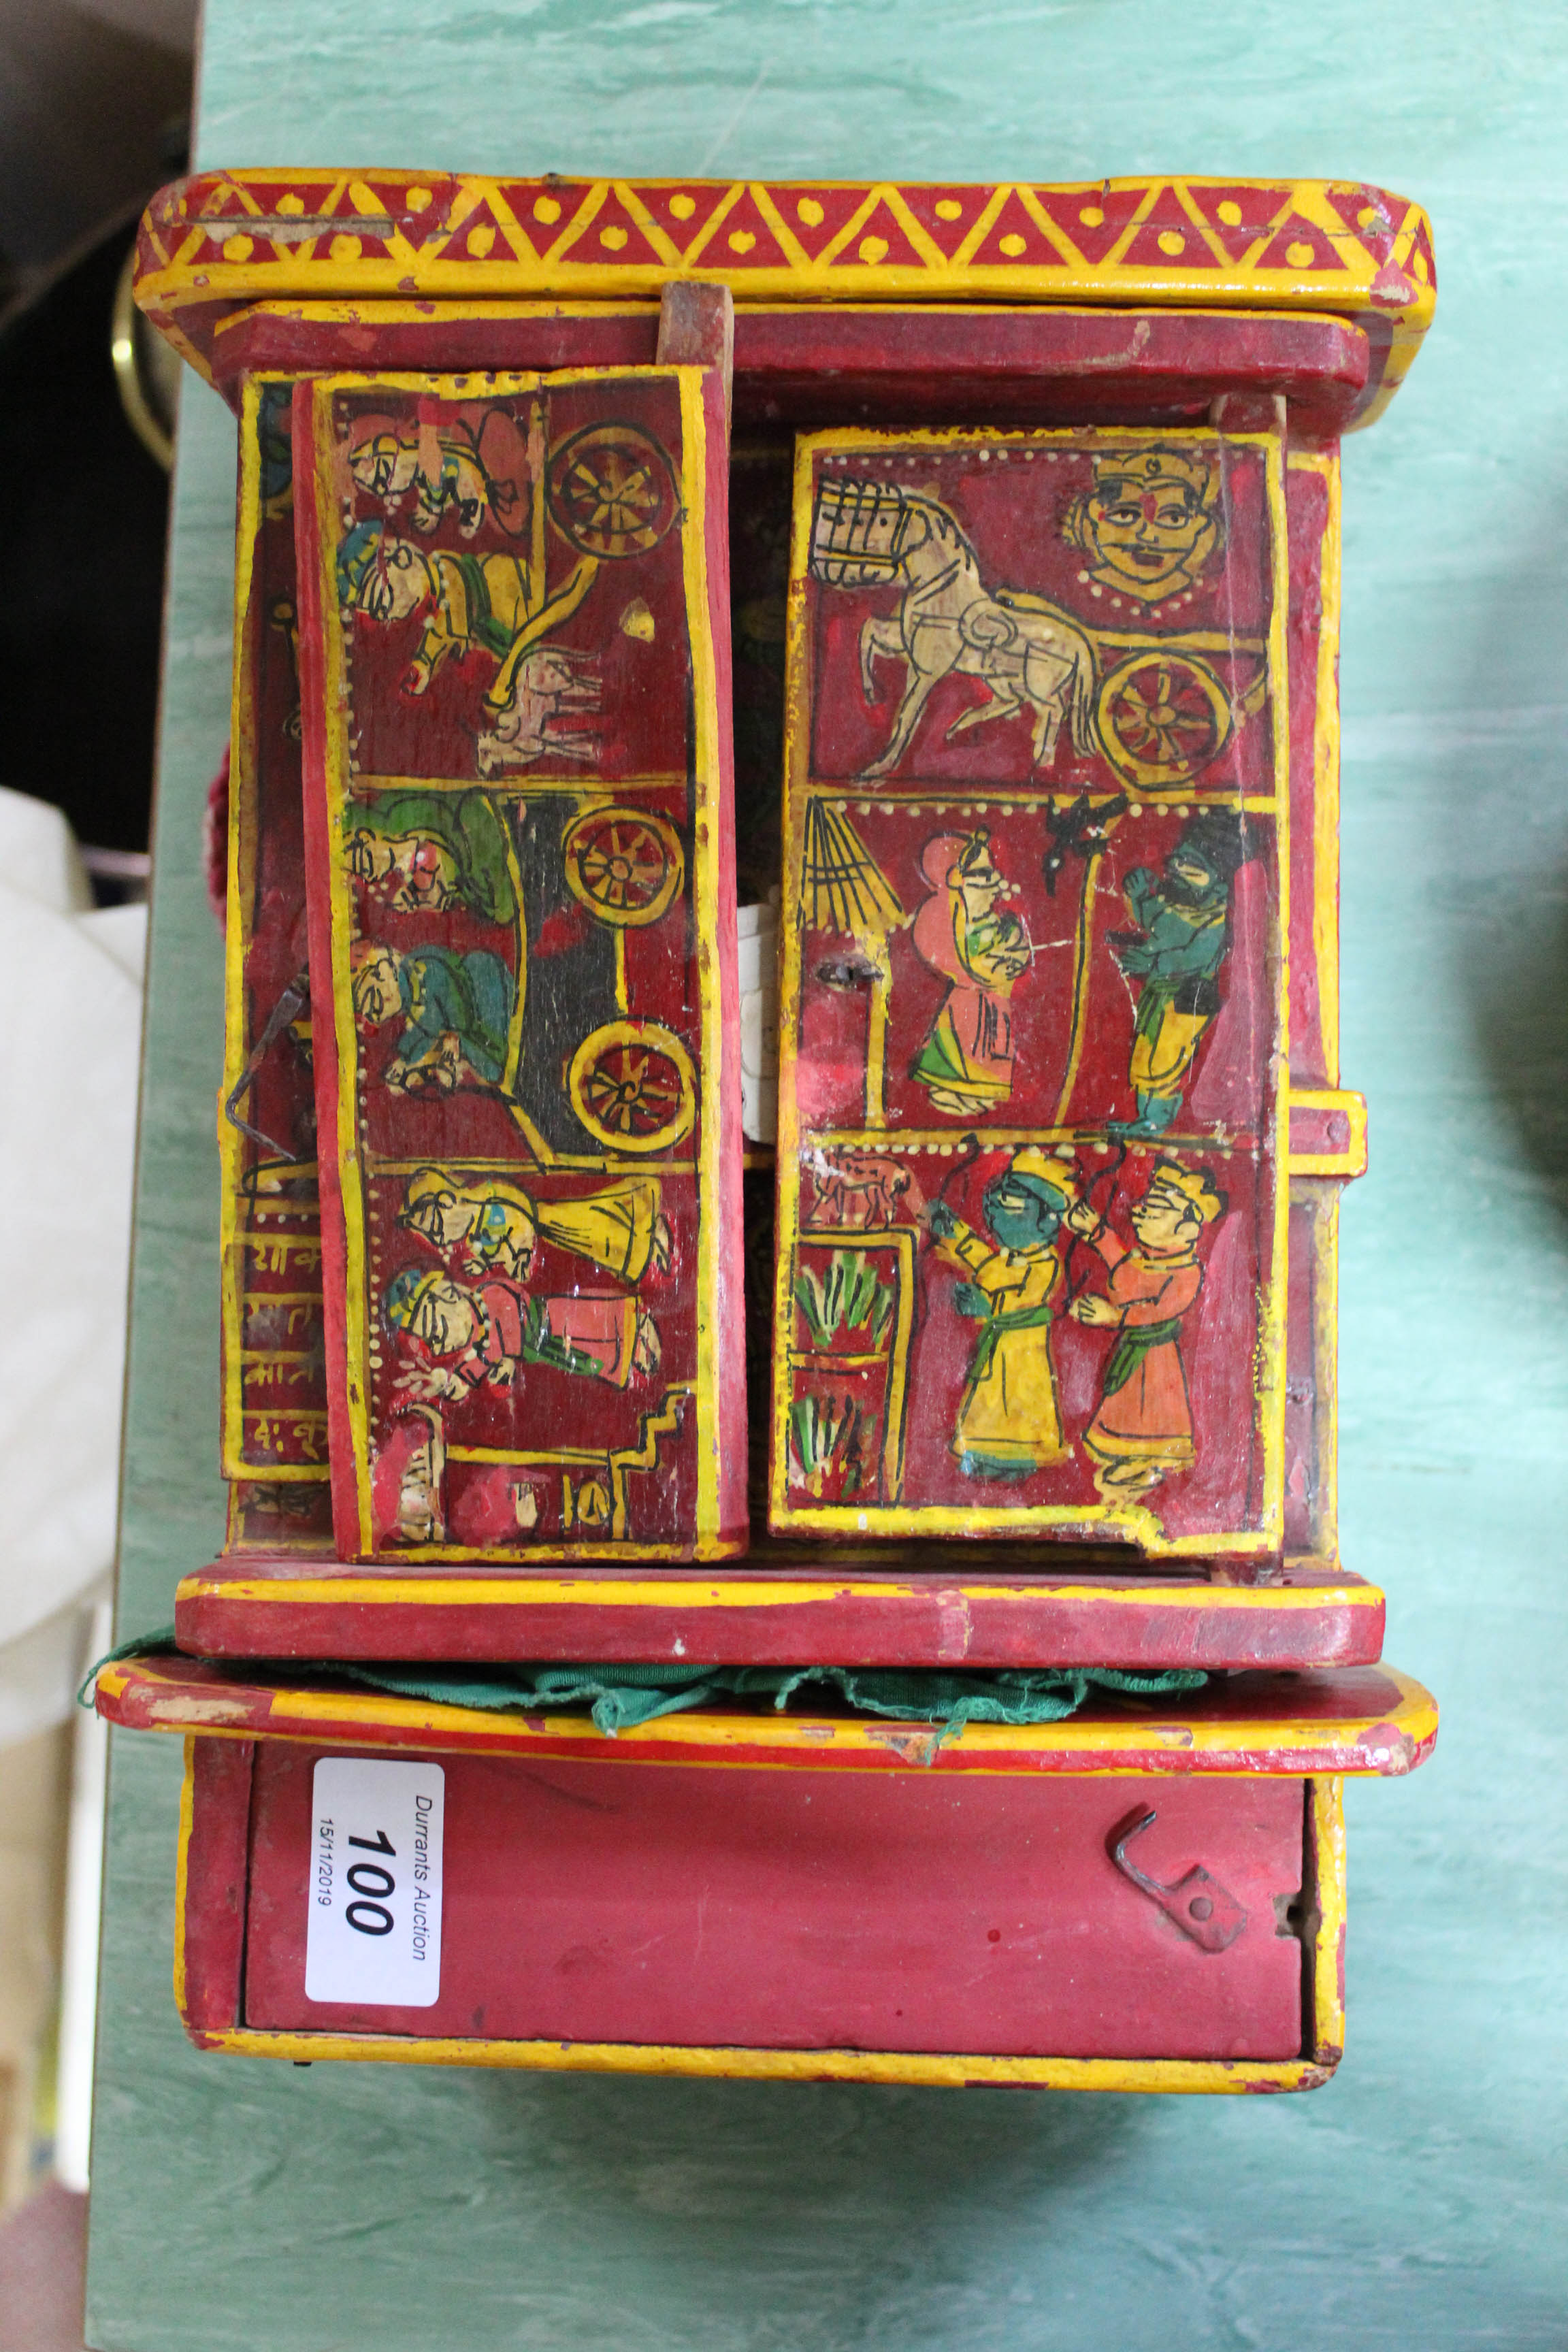 An Indian polychrome painted miniature theatre